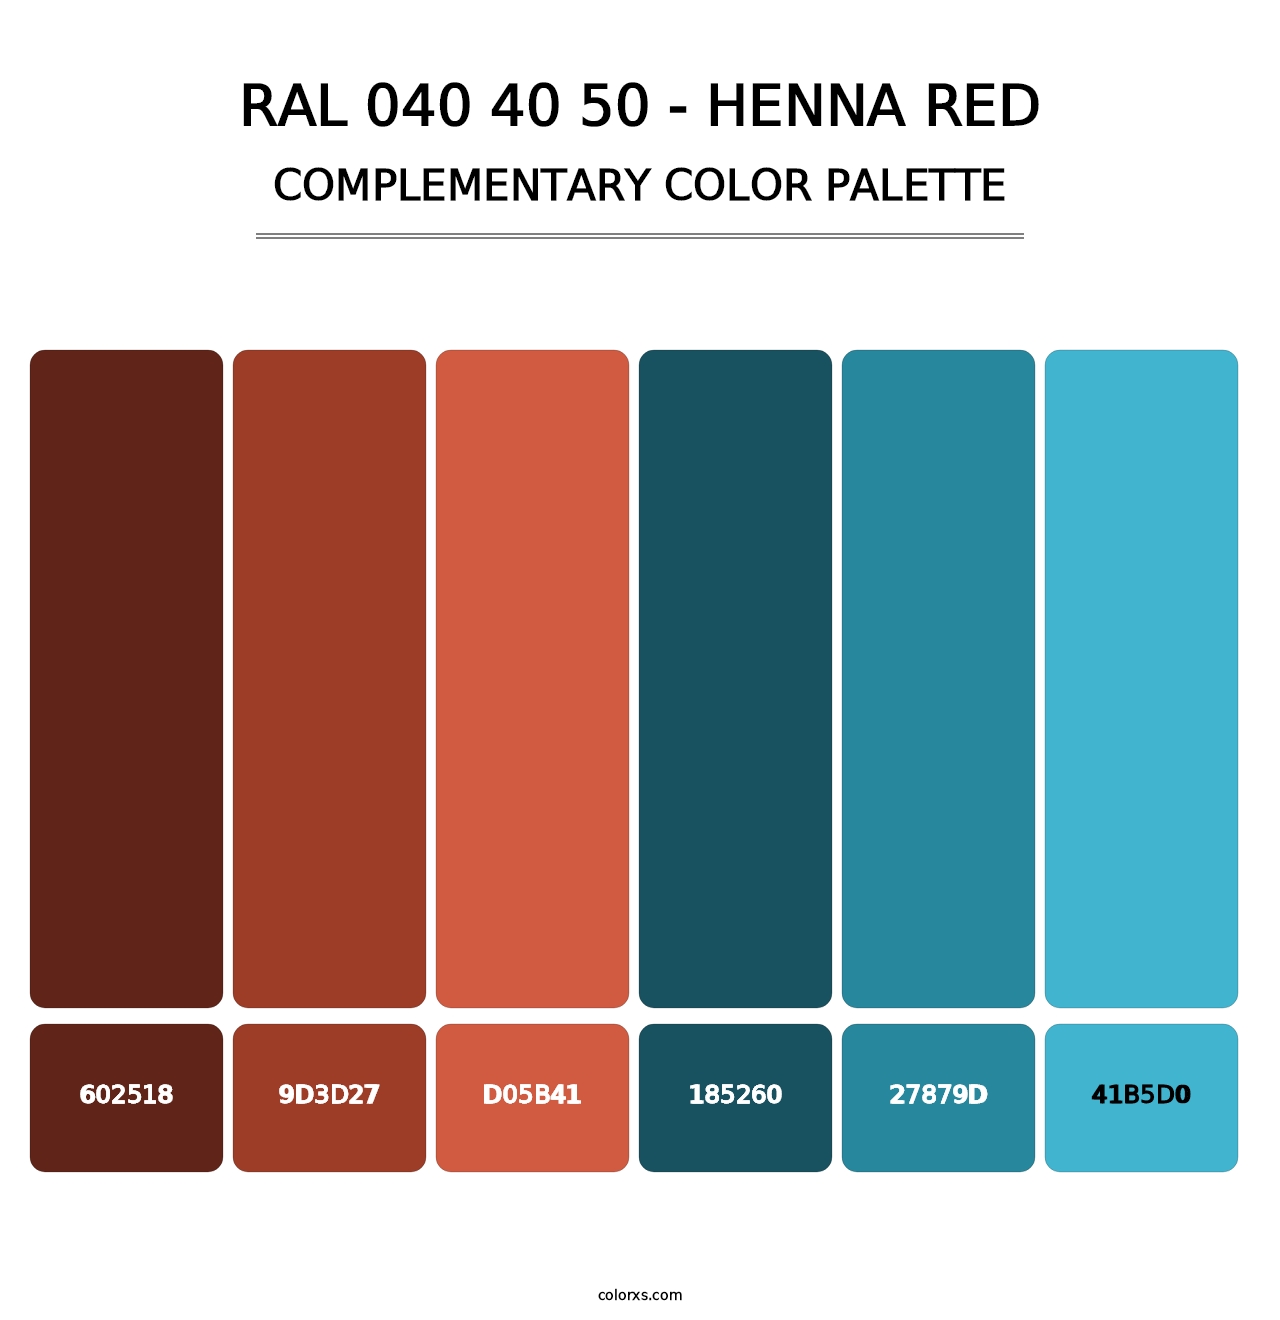 RAL 040 40 50 - Henna Red - Complementary Color Palette